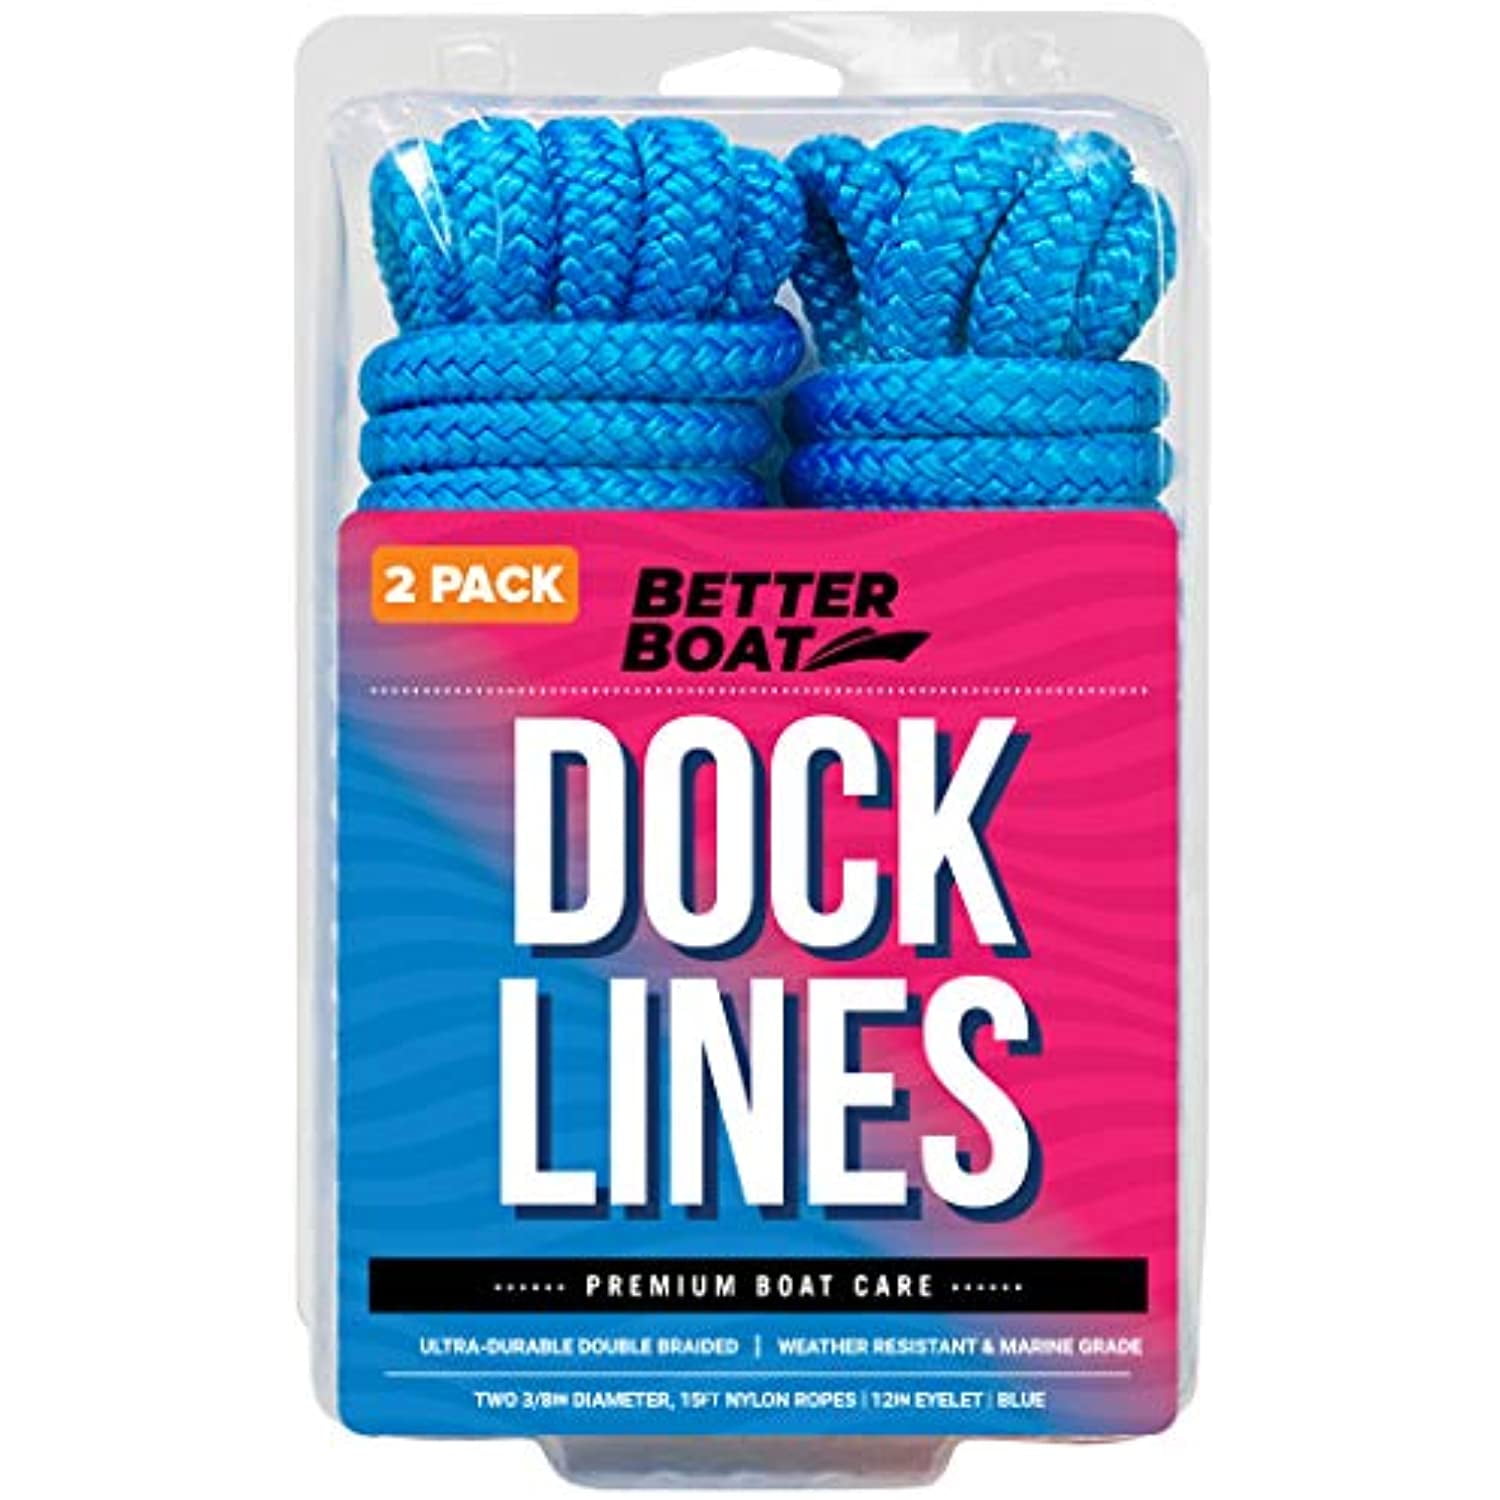 Boat Dock Lines Dock Rope Mooring Rope Boat Accessory Double Braided Nylon Docking Line for Boats Fender 4 Pack Docking 